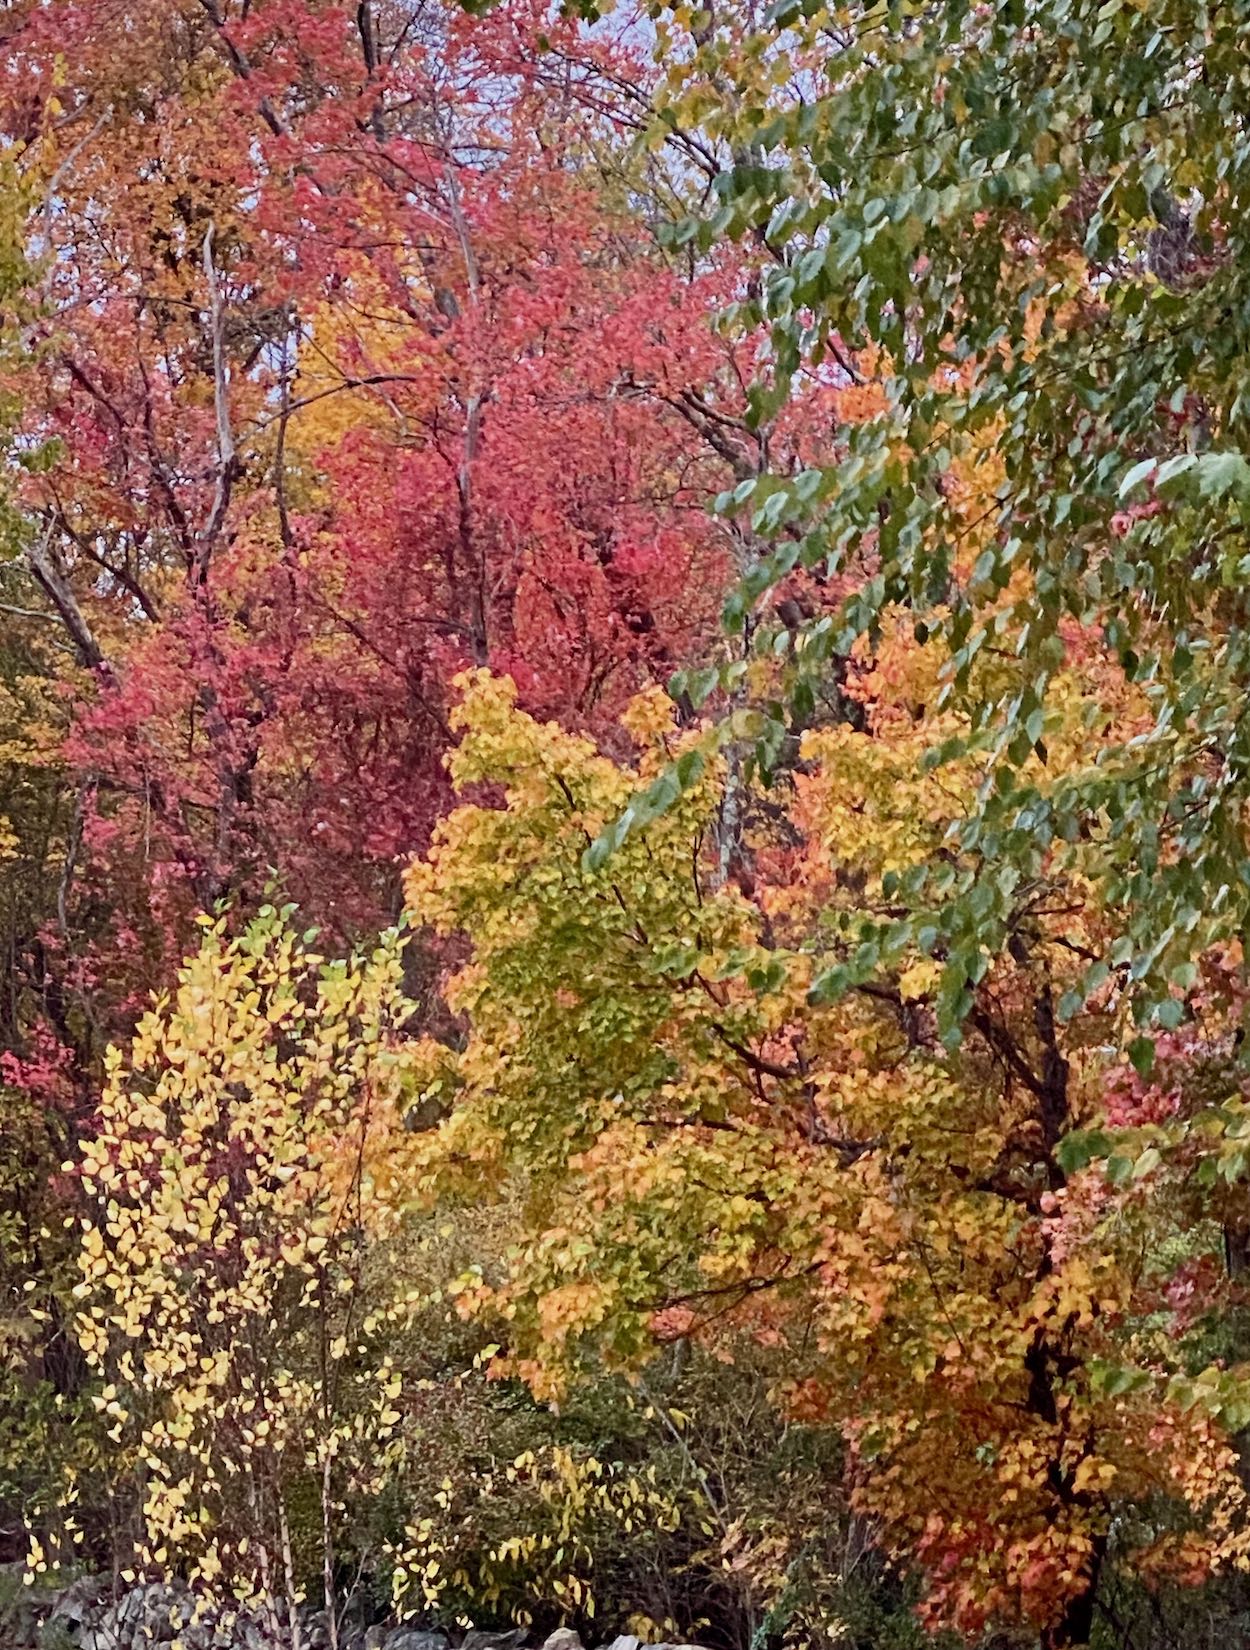 It's the weekend! Number 315, Colorful Foliage in Reds and Yellows